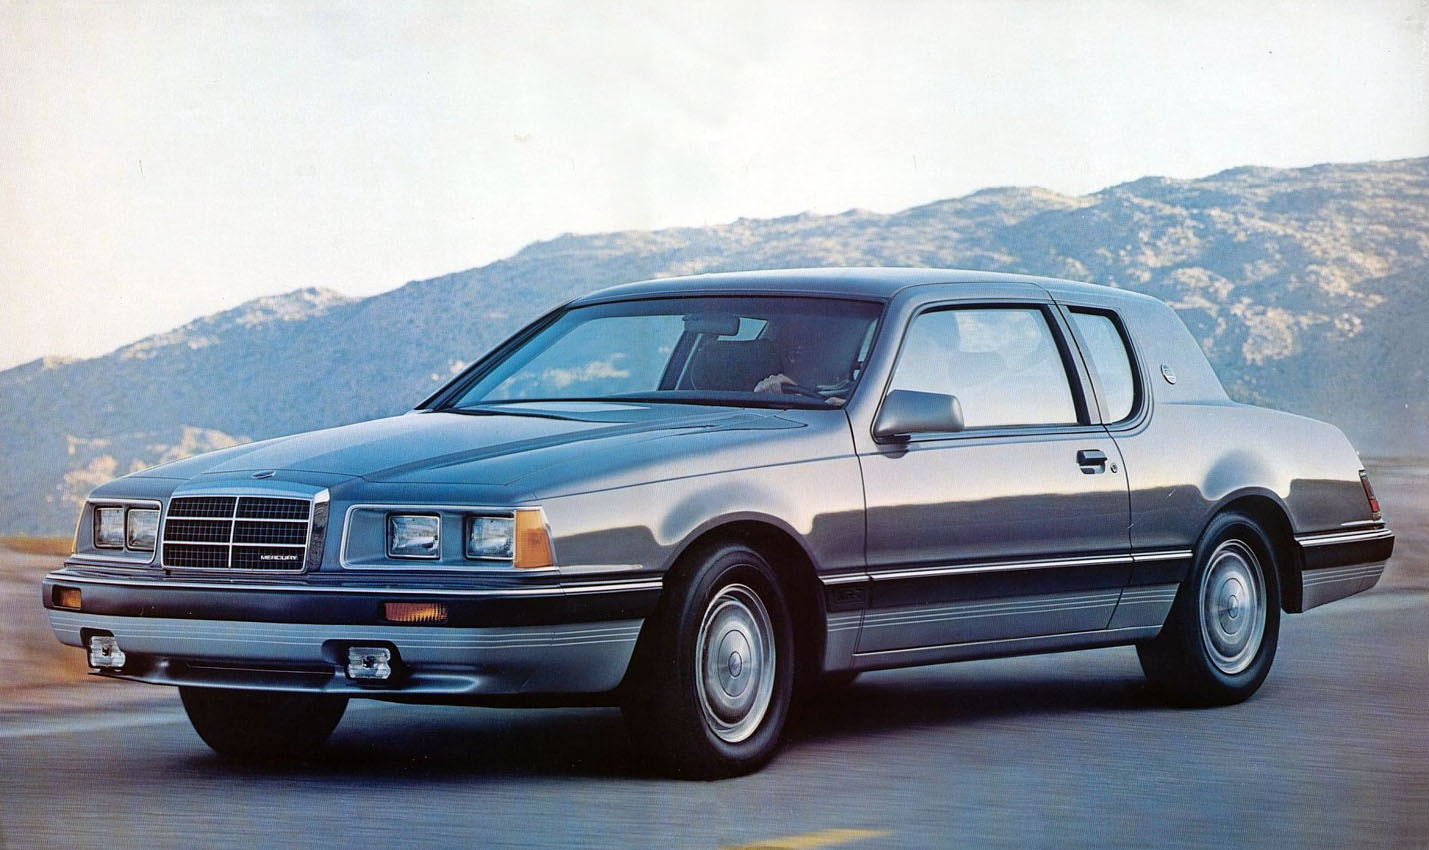 Ford cougar 1987 photo - 5